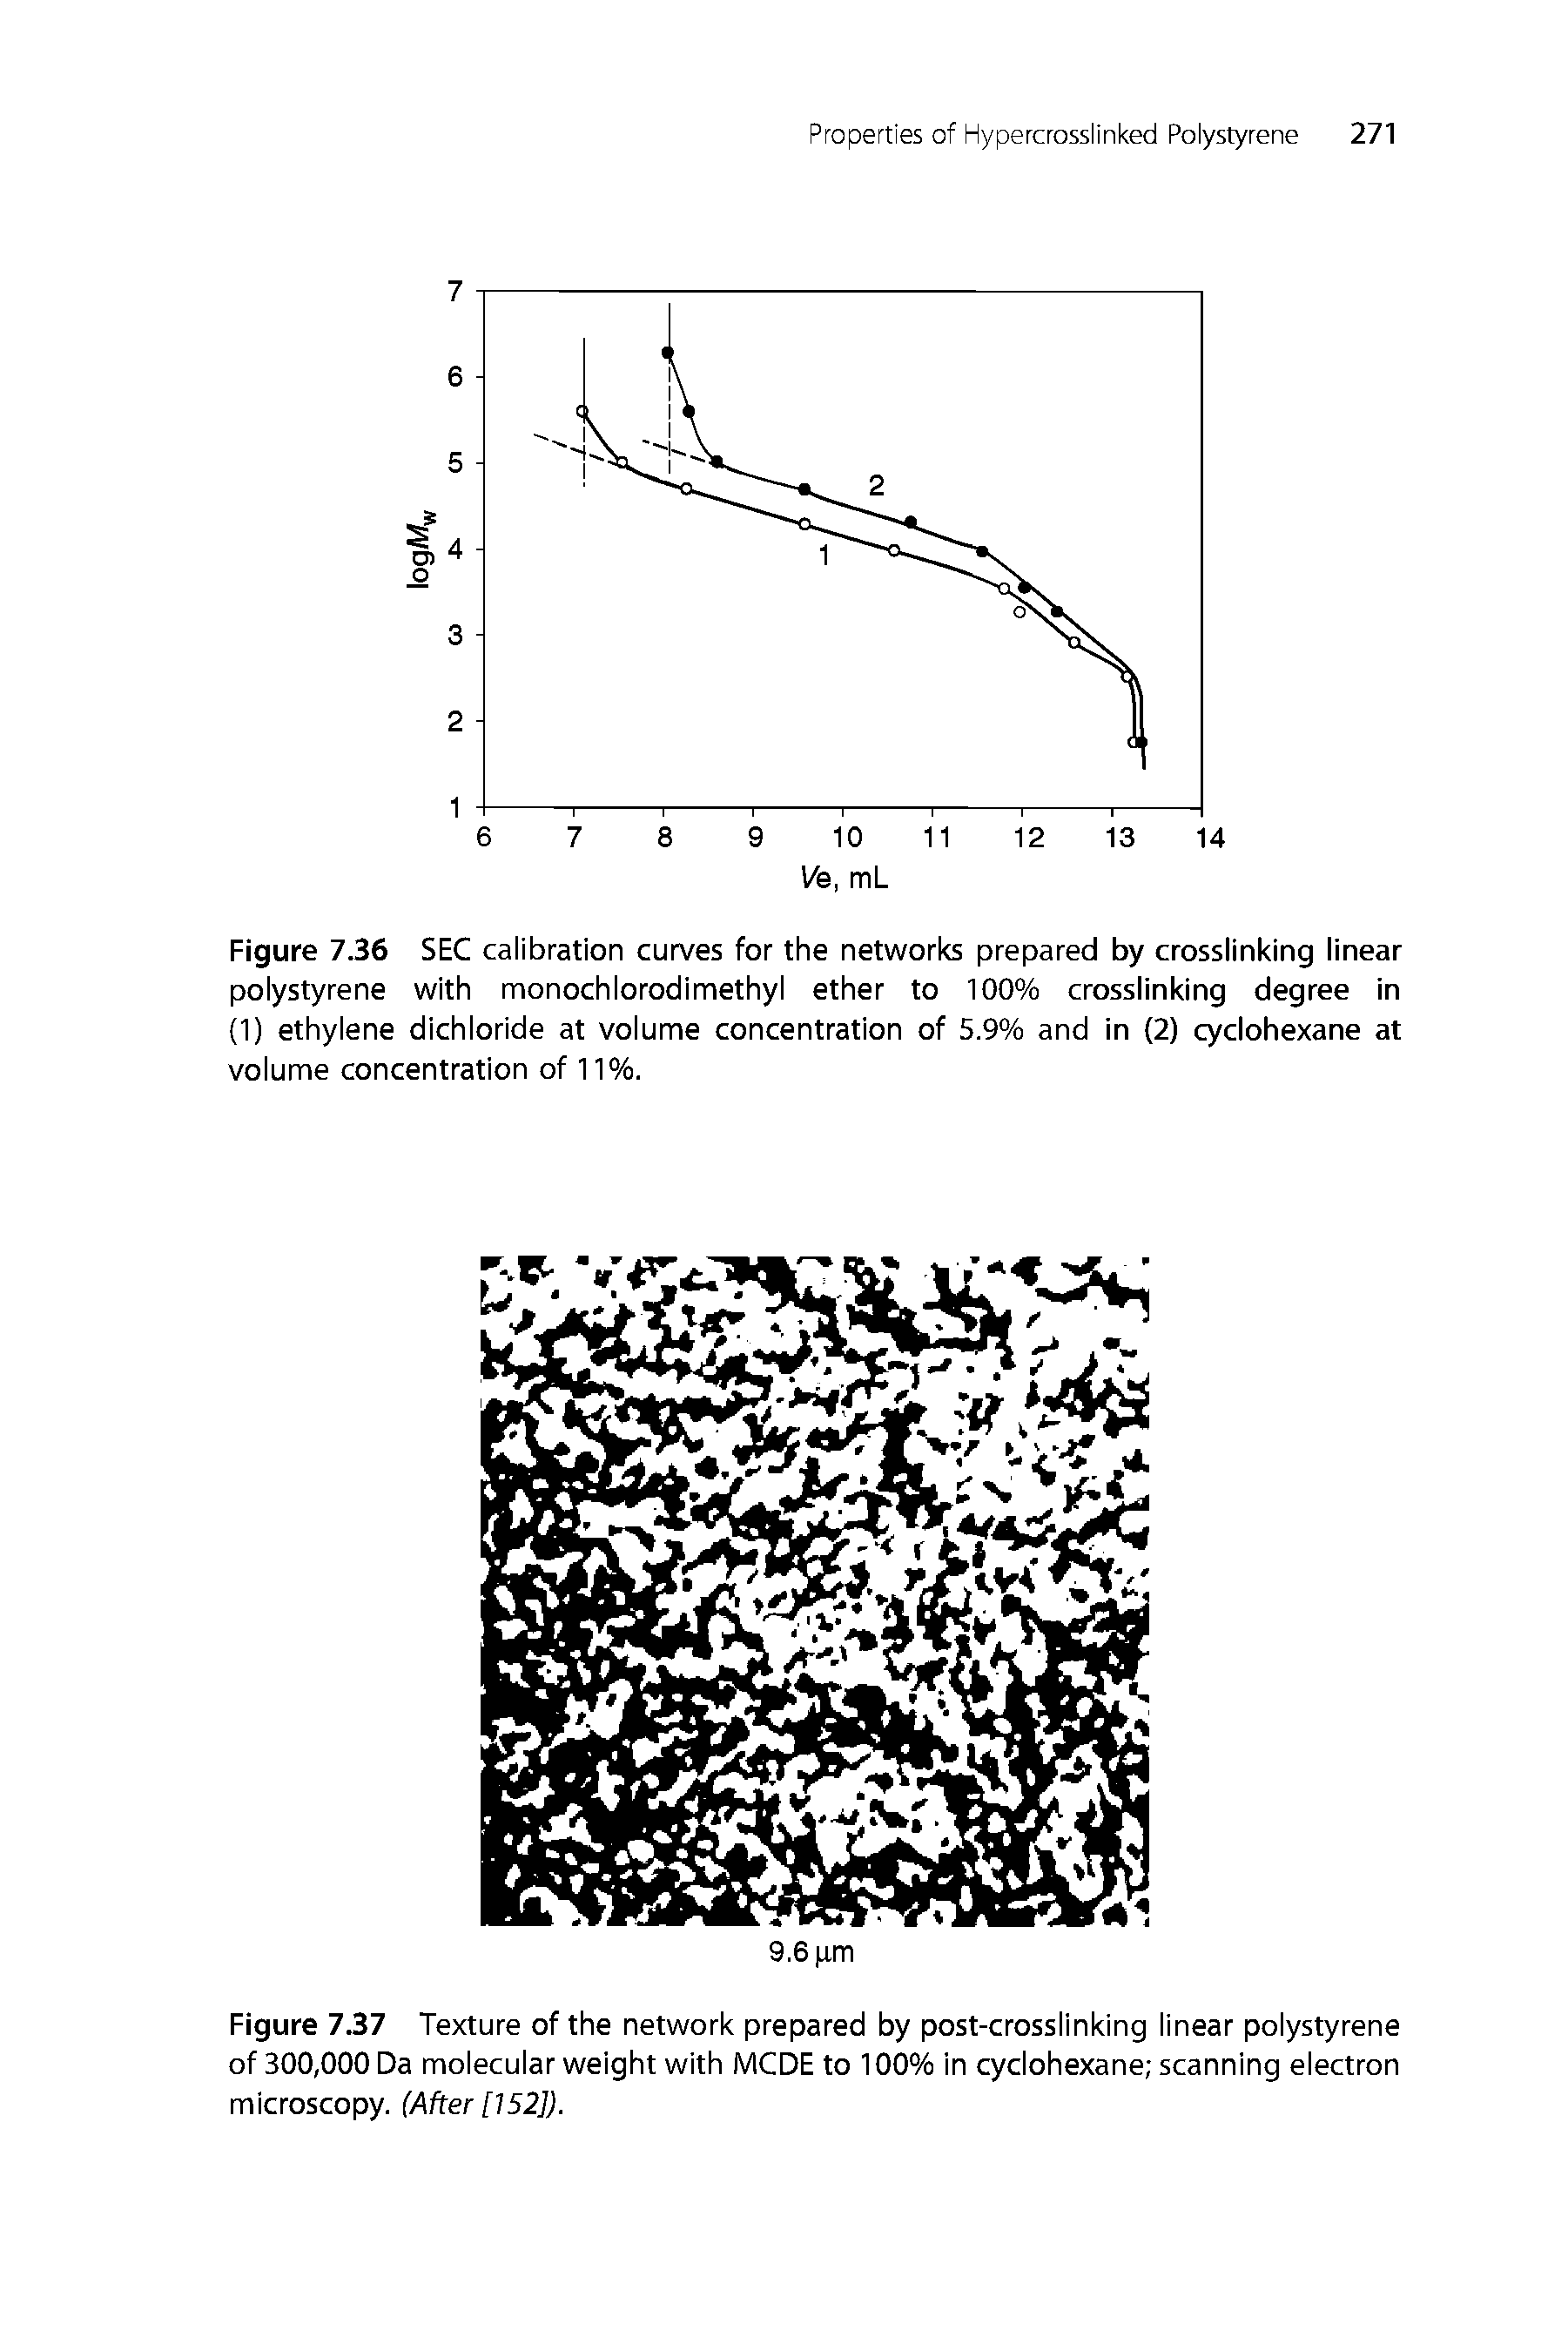 Figure 7.36 SEC calibration curves for the networks prepared by crosslinking linear polystyrene with monochlorodimethyl ether to 100% crosslinking degree in (1) ethylene dichloride at volume concentration of 5.9% and in (2) cyclohexane at volume concentration of 11%.